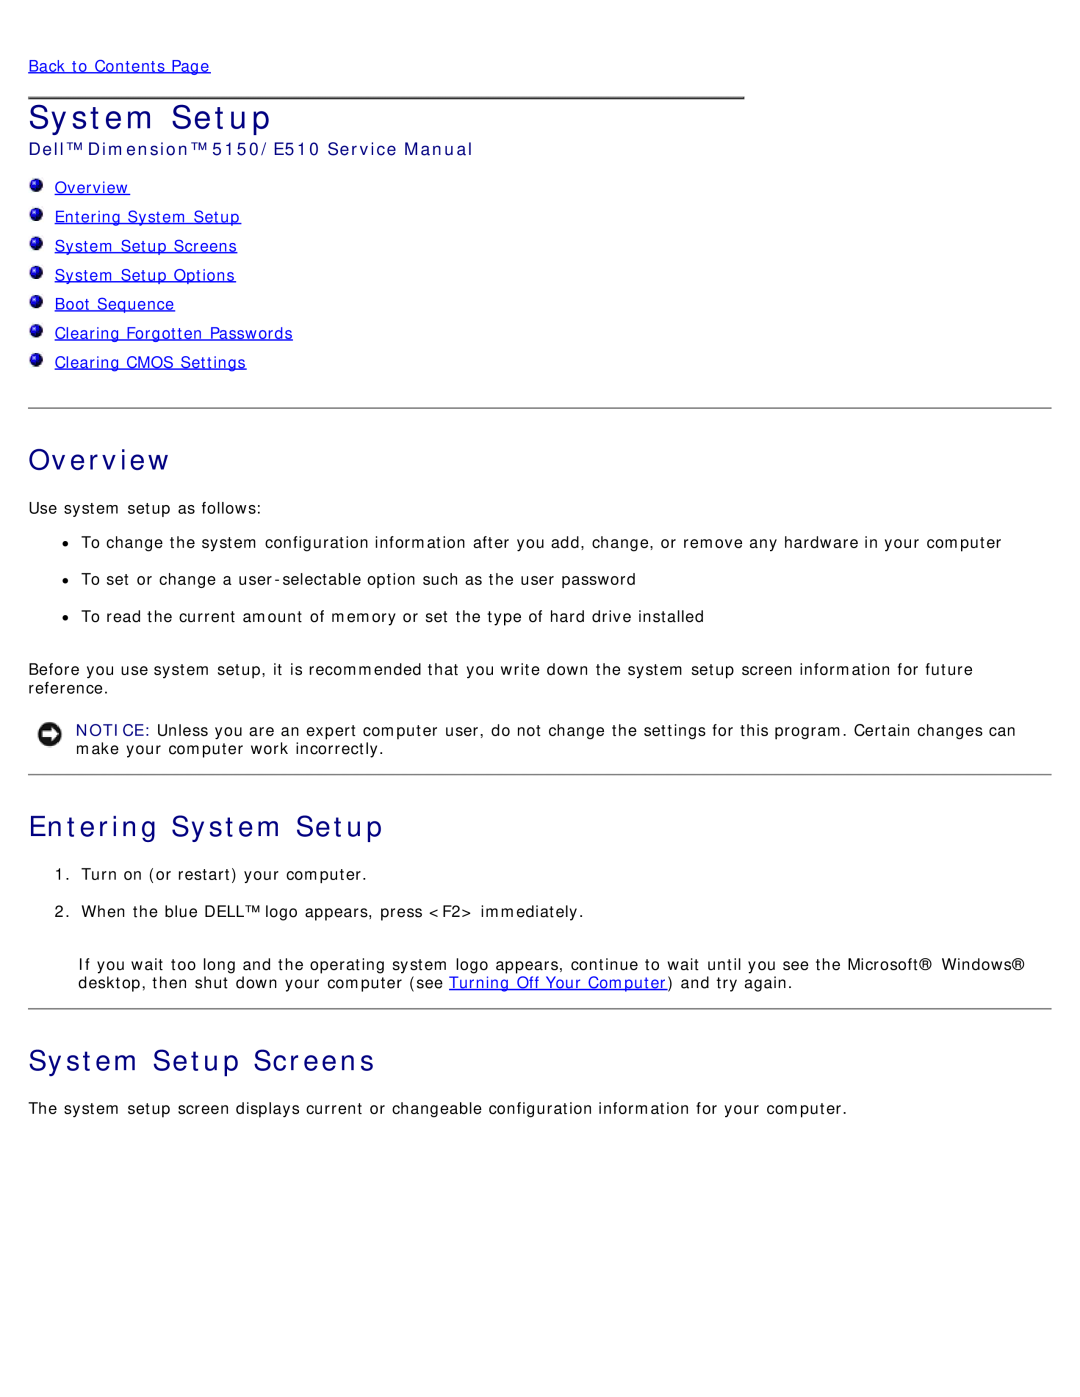 Dell DCSM manual Overview Entering System Setup System Setup Screens, Clearing CMOS Settings 